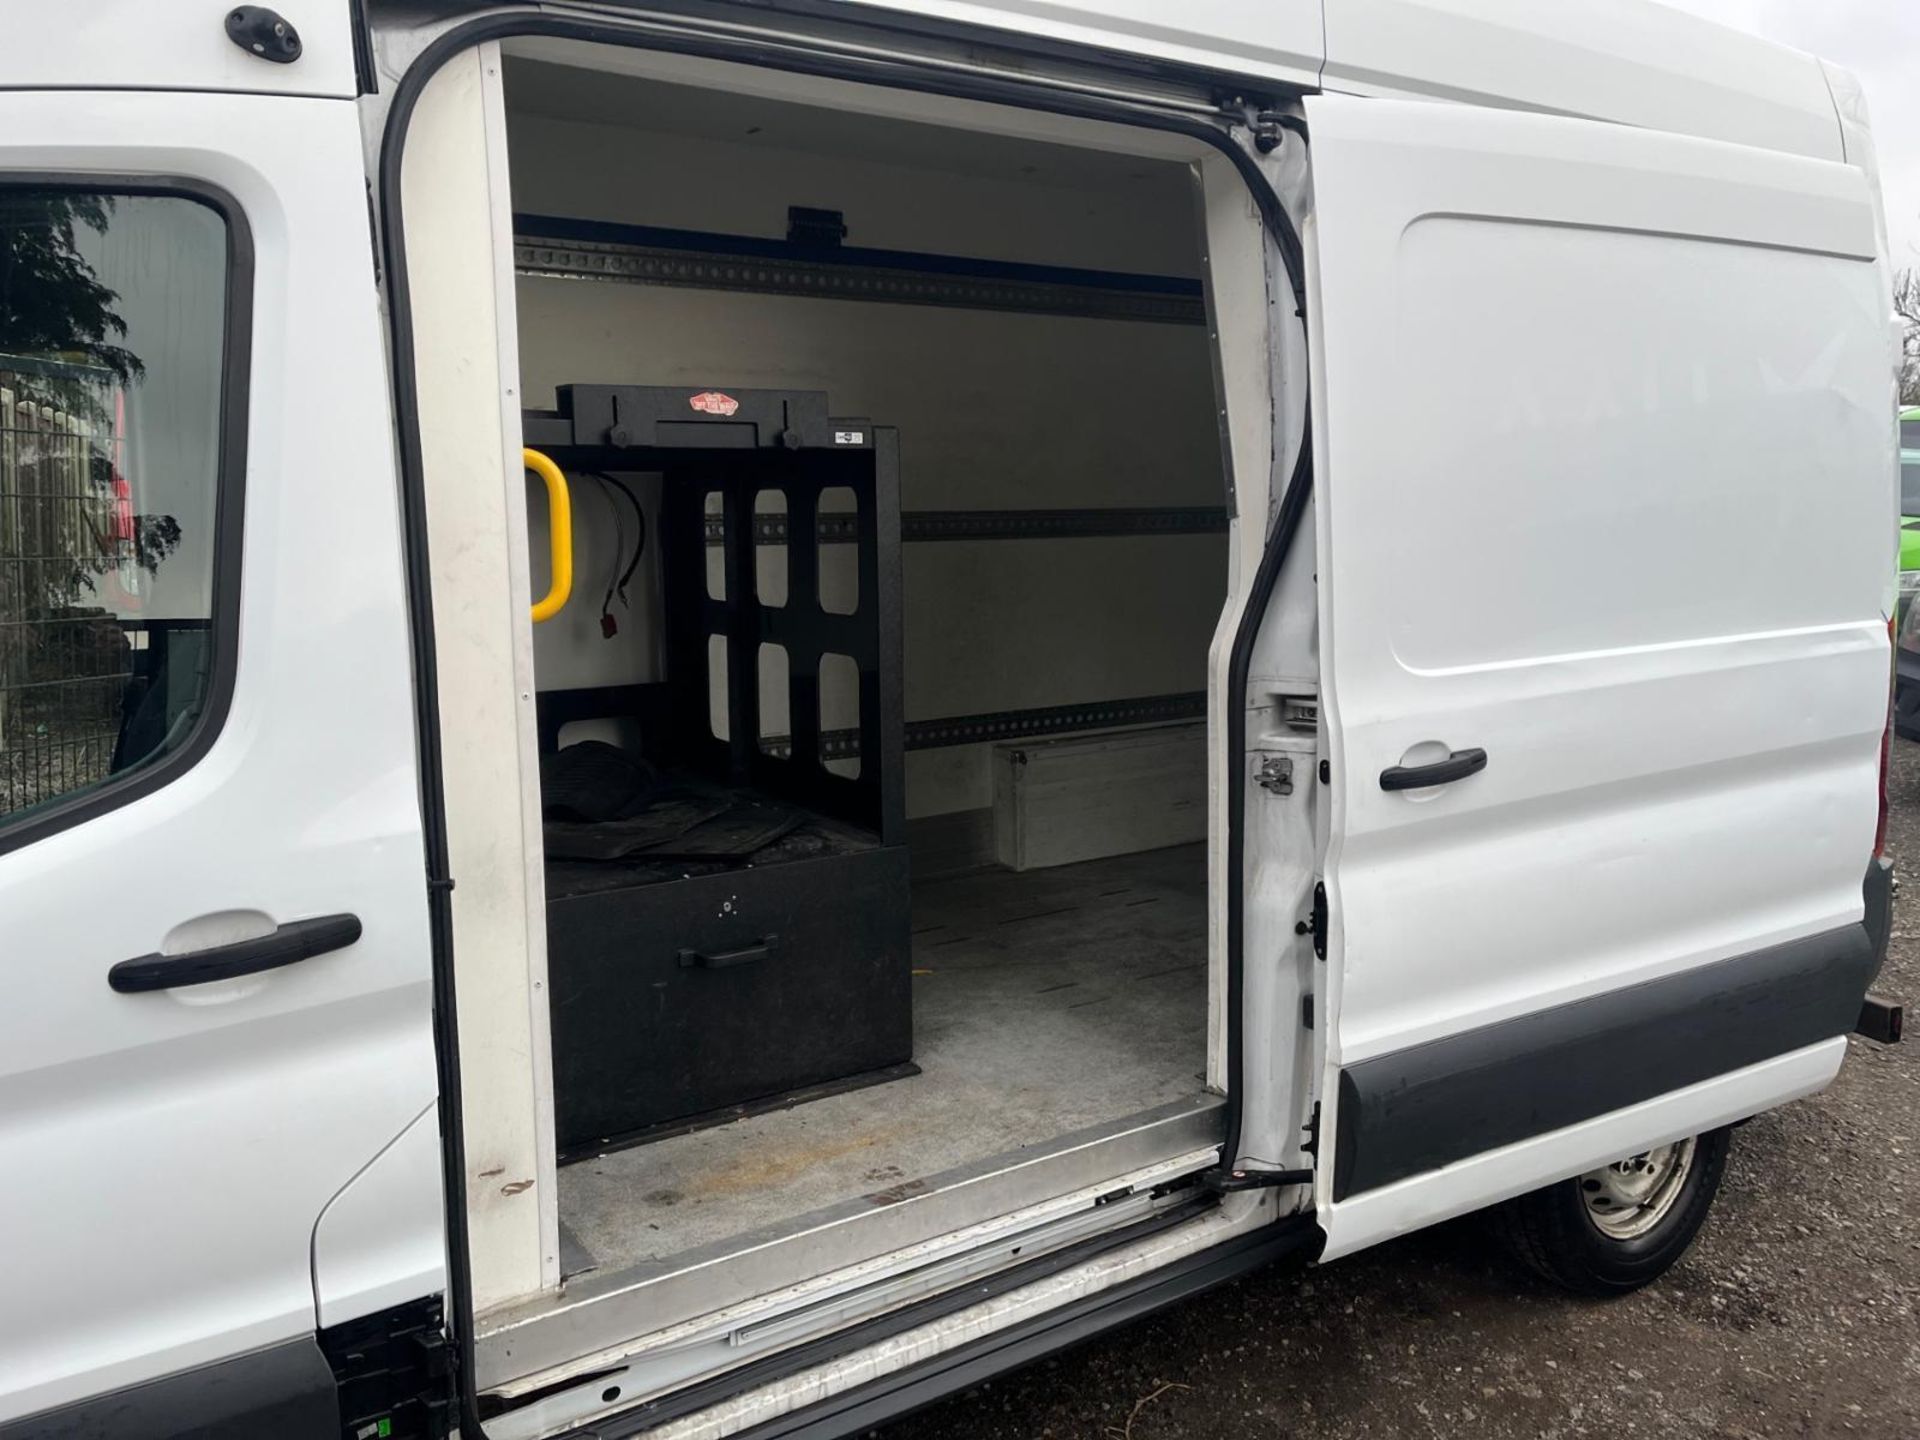 2018 FORD TRANSIT 2.0 TDCI 130PS L3 H3 - RELIABLE AND SPACIOUS LONG WHEELBASE PANEL VAN - Image 11 of 11